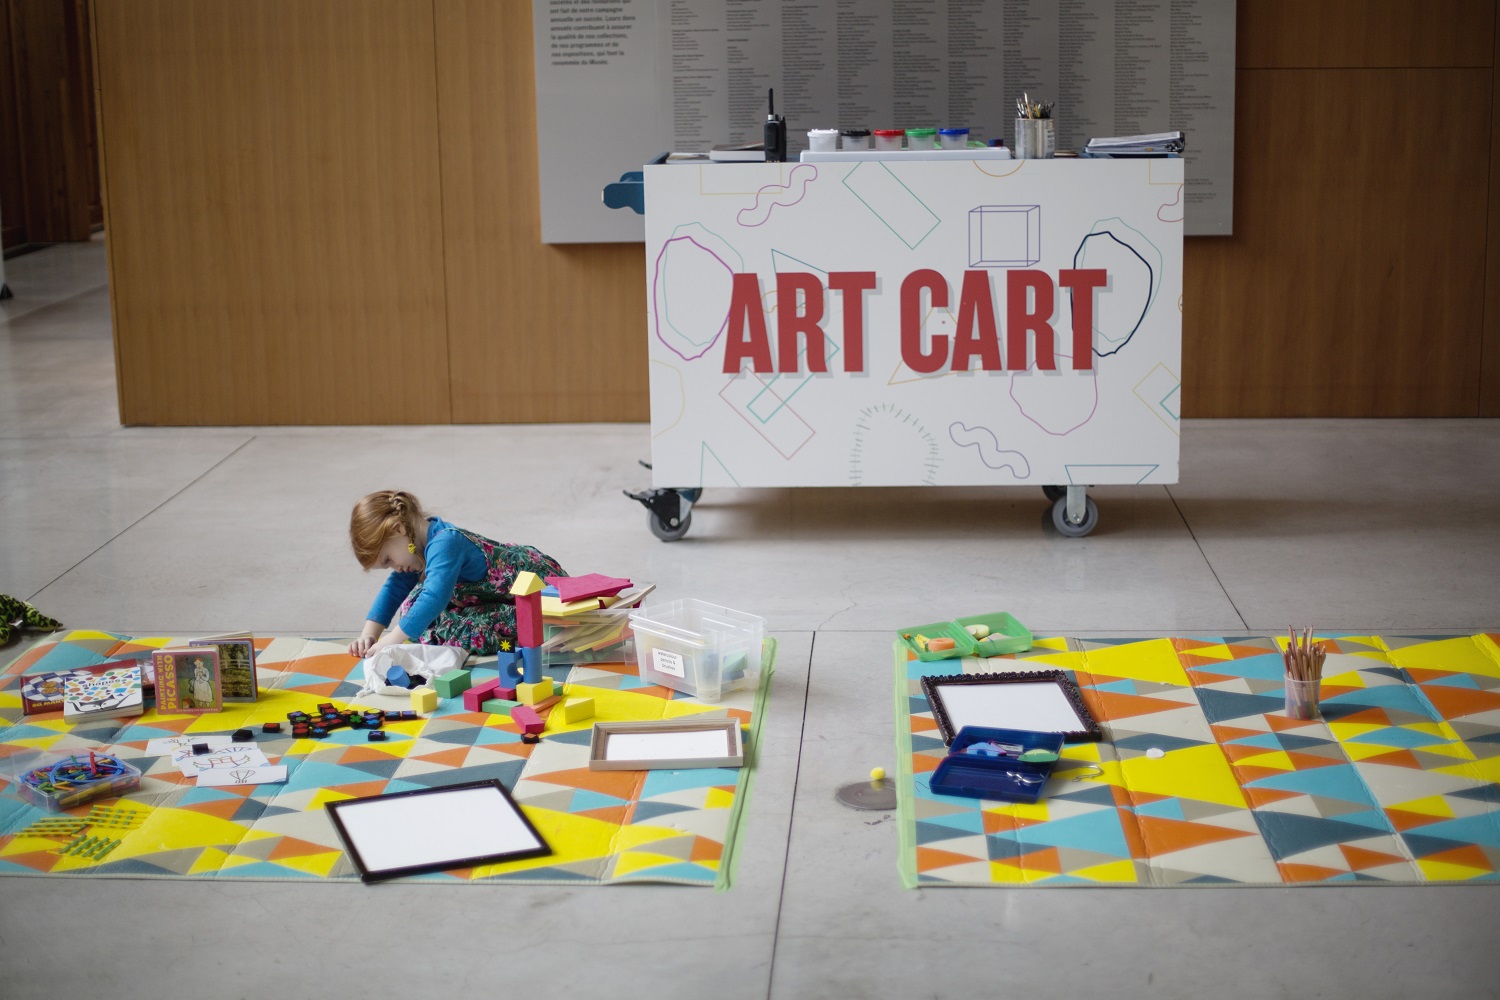 A child plays with art materials on the floor of the AGO